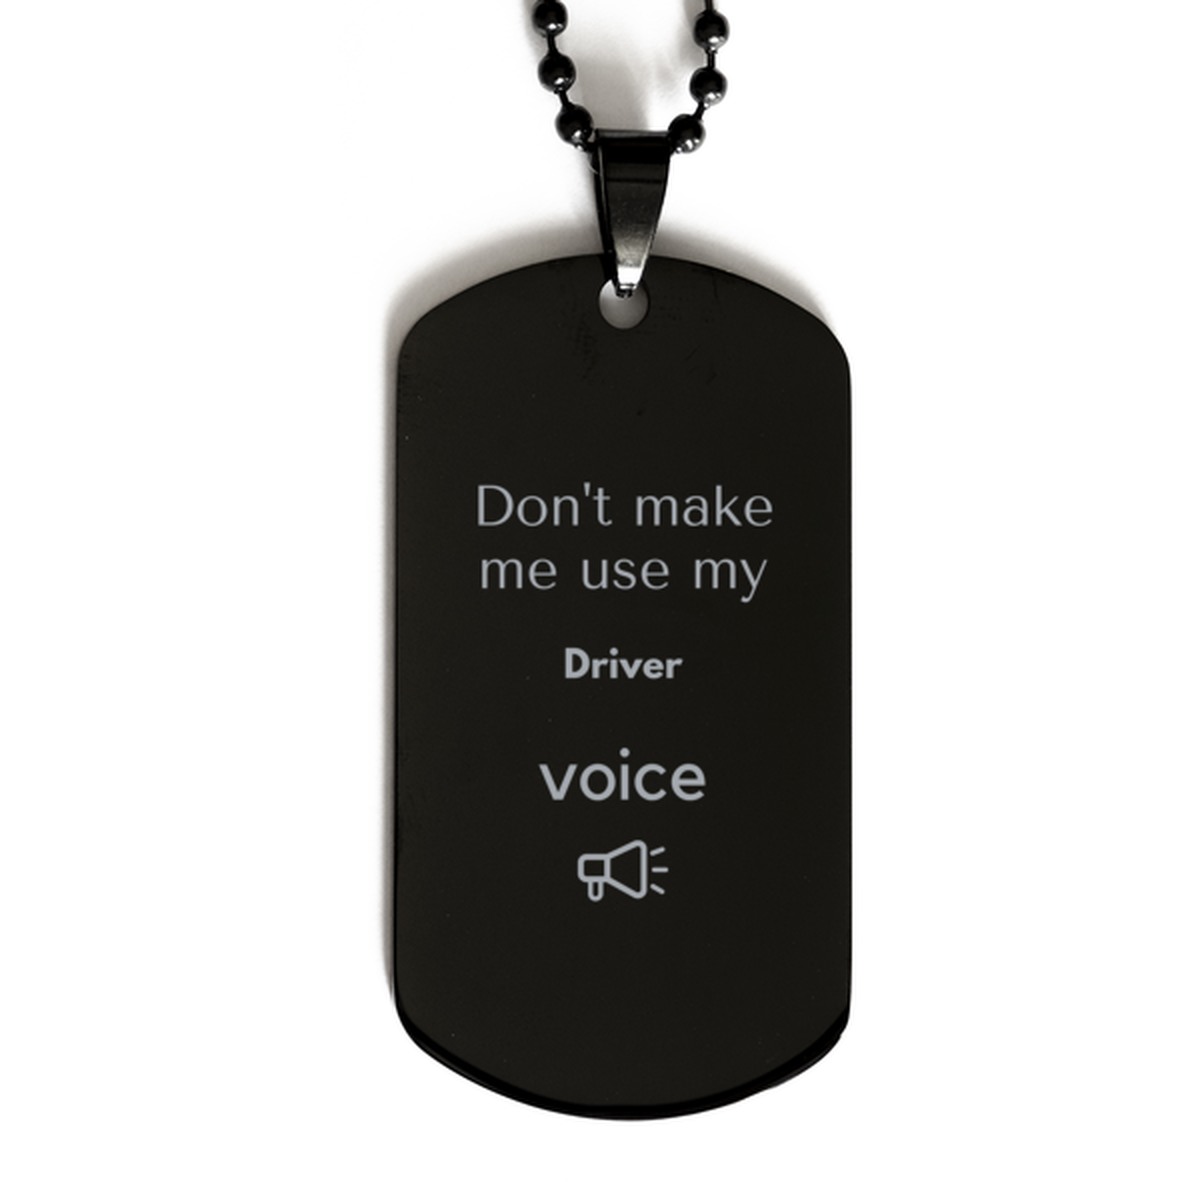 Don't make me use my Driver voice, Sarcasm Driver Gifts, Christmas Driver Black Dog Tag Birthday Unique Gifts For Driver Coworkers, Men, Women, Colleague, Friends